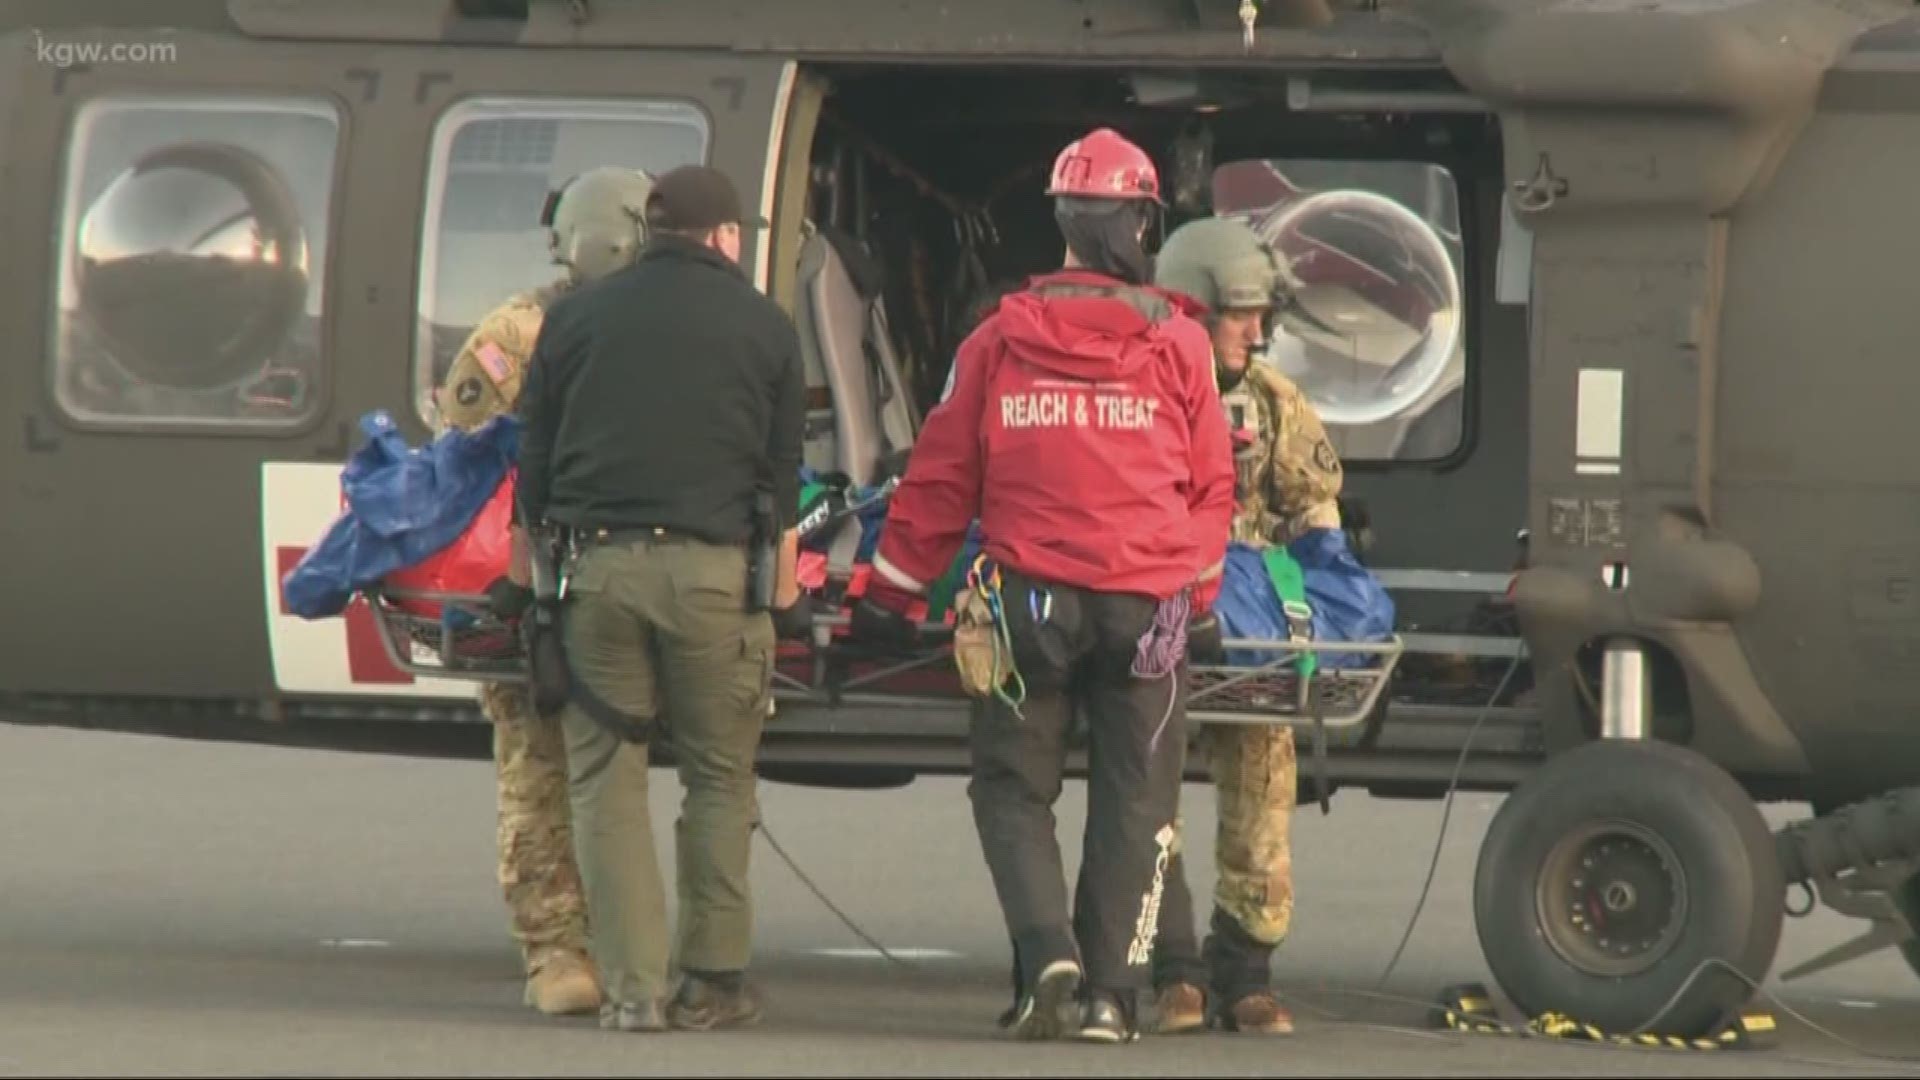 Crews work to rescue a climber who fell on Mount Hood.